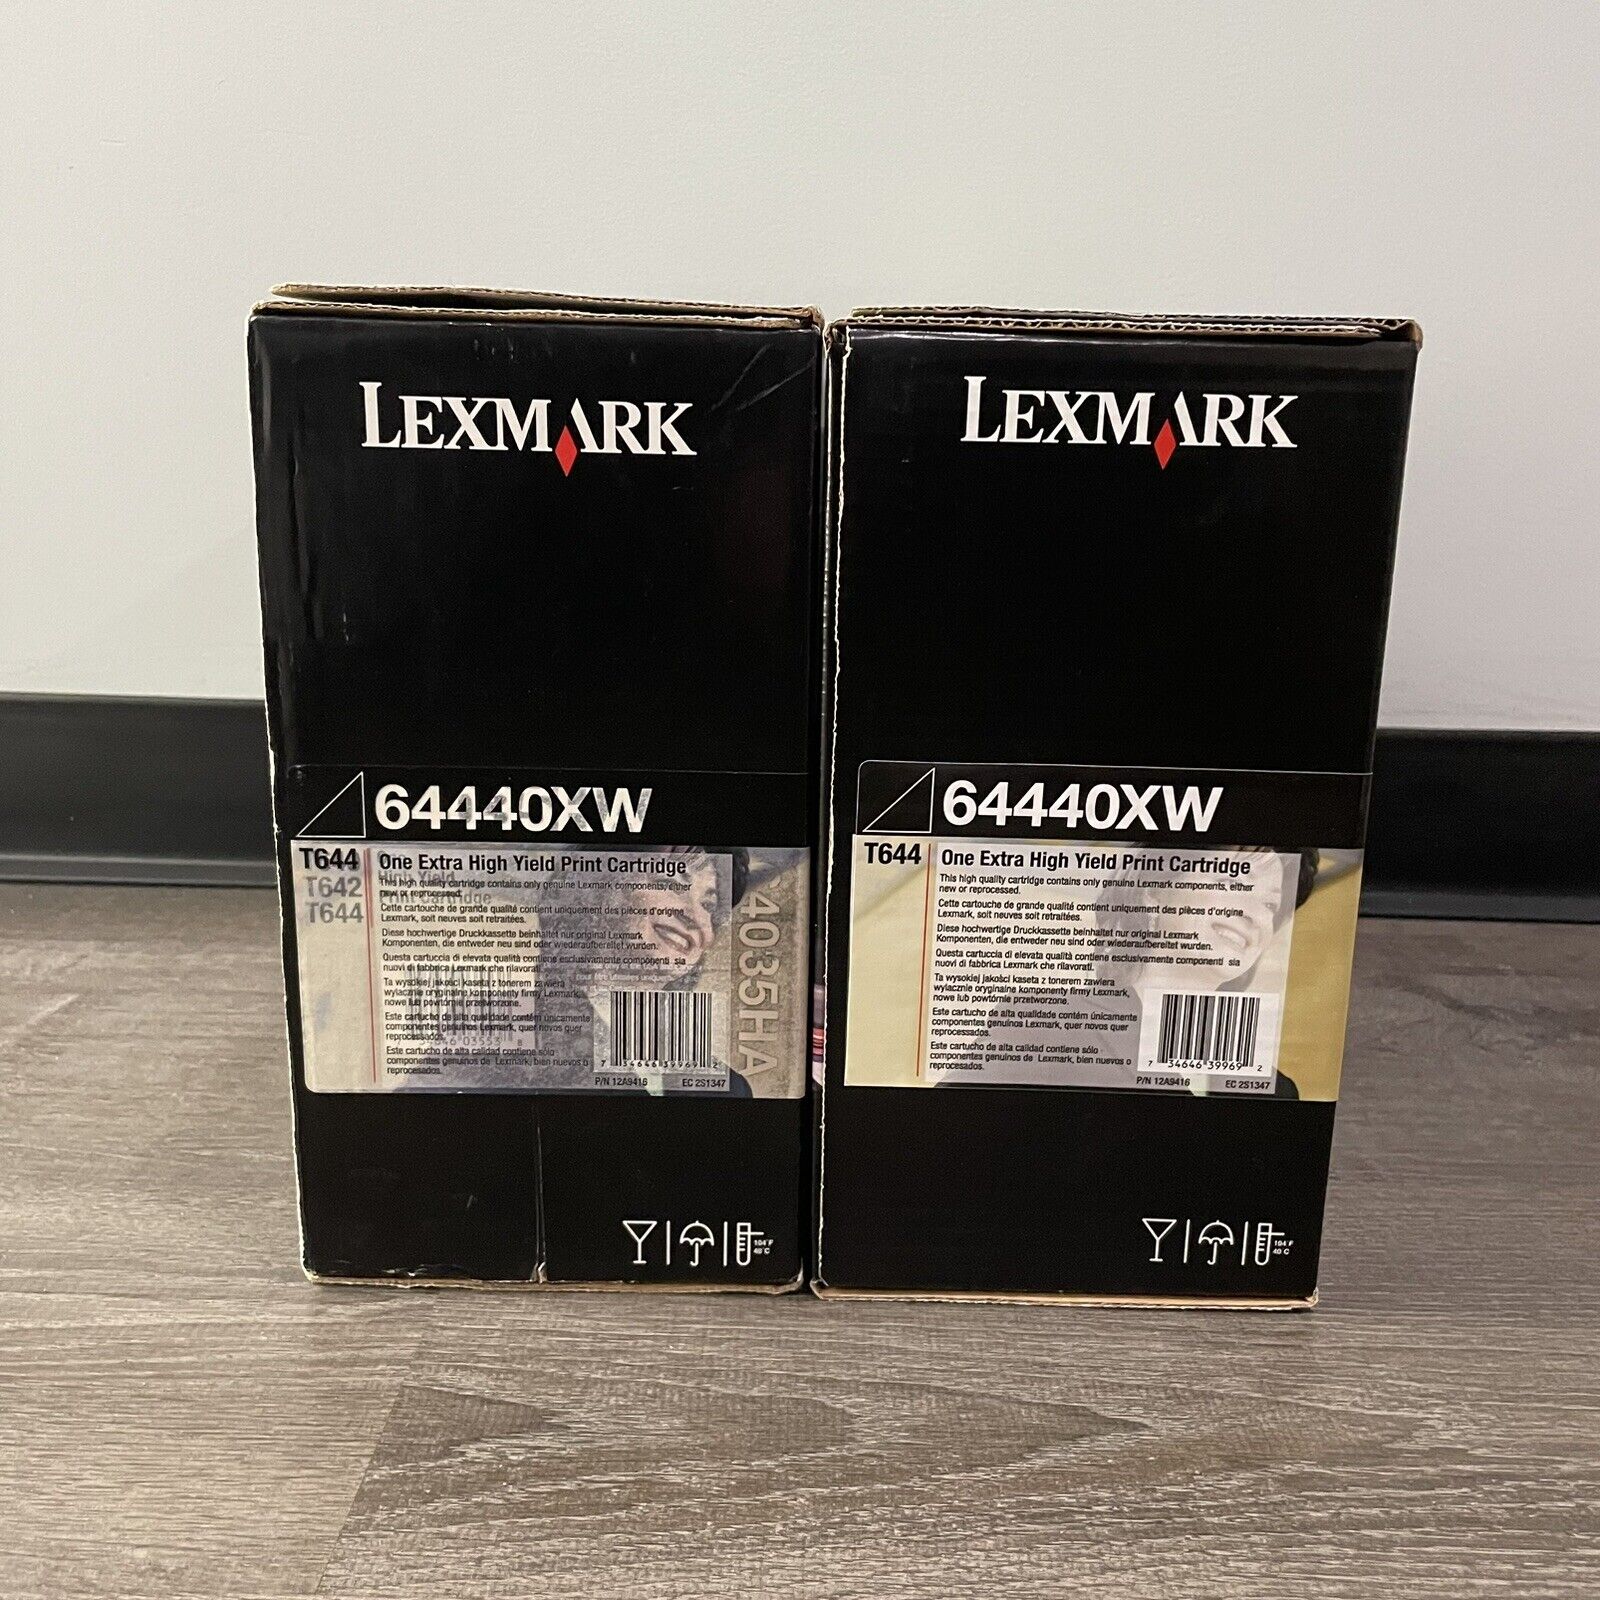 Genuine Lexmark 64440XW Black EXTRA High Yield Print Cartridge lot of 2 for T644